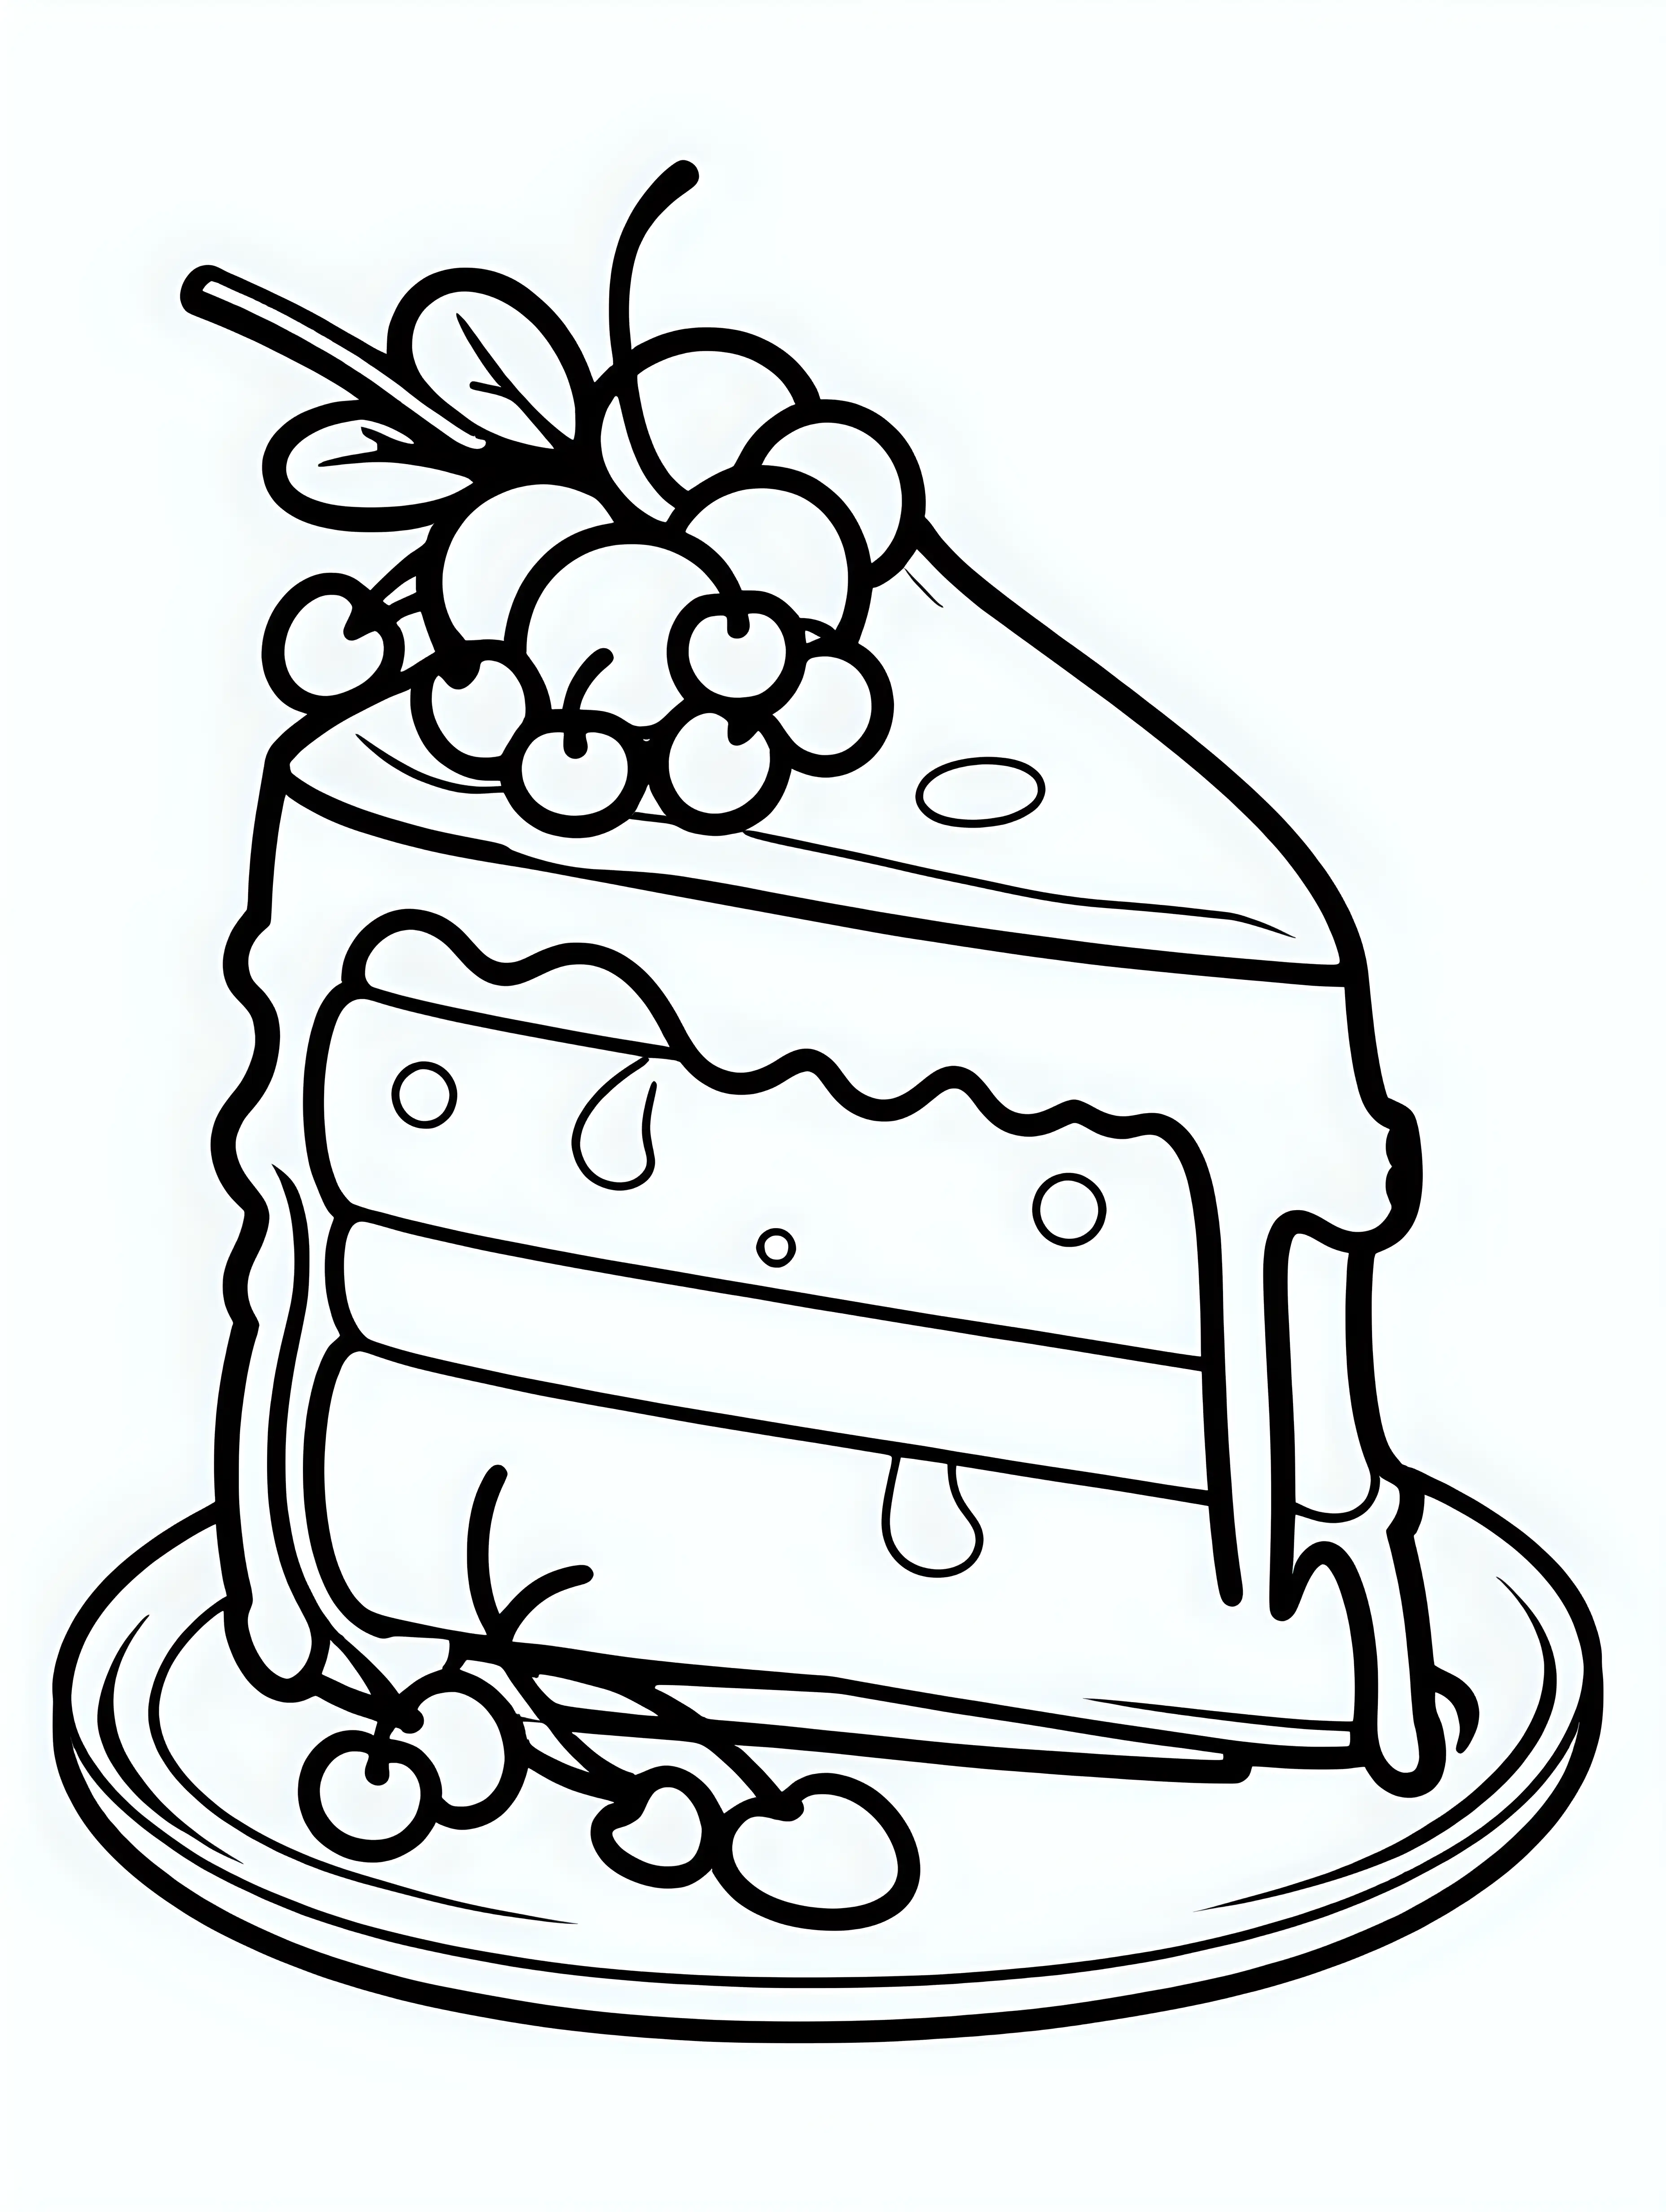 Whimsical Cartoon Coloring Page Adorable Cherry Cheesecake Slice on a Clean White Background